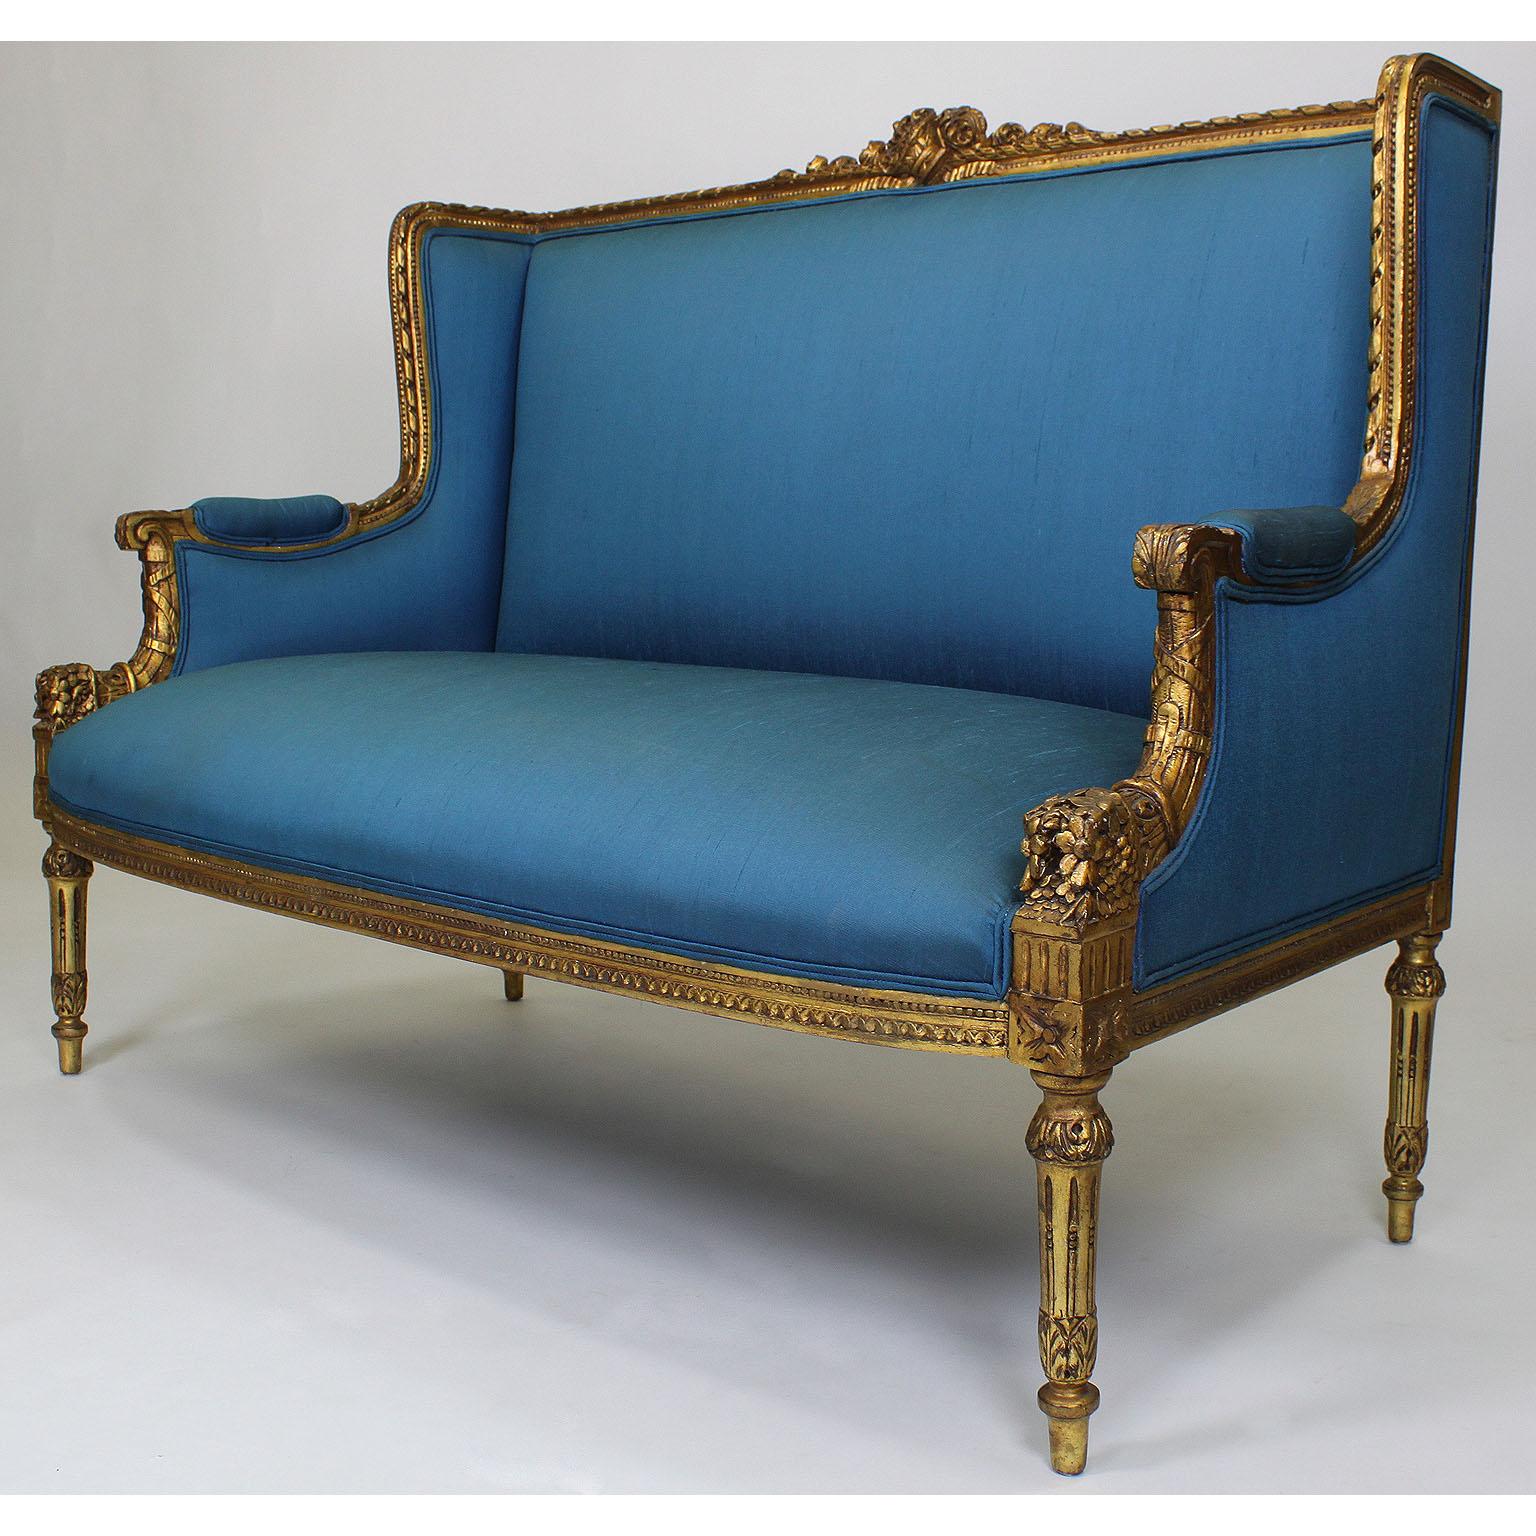 French 19th-20th Century Belle Époque Louis XVI Style Bergère Giltwood Salon Set In Fair Condition For Sale In Los Angeles, CA